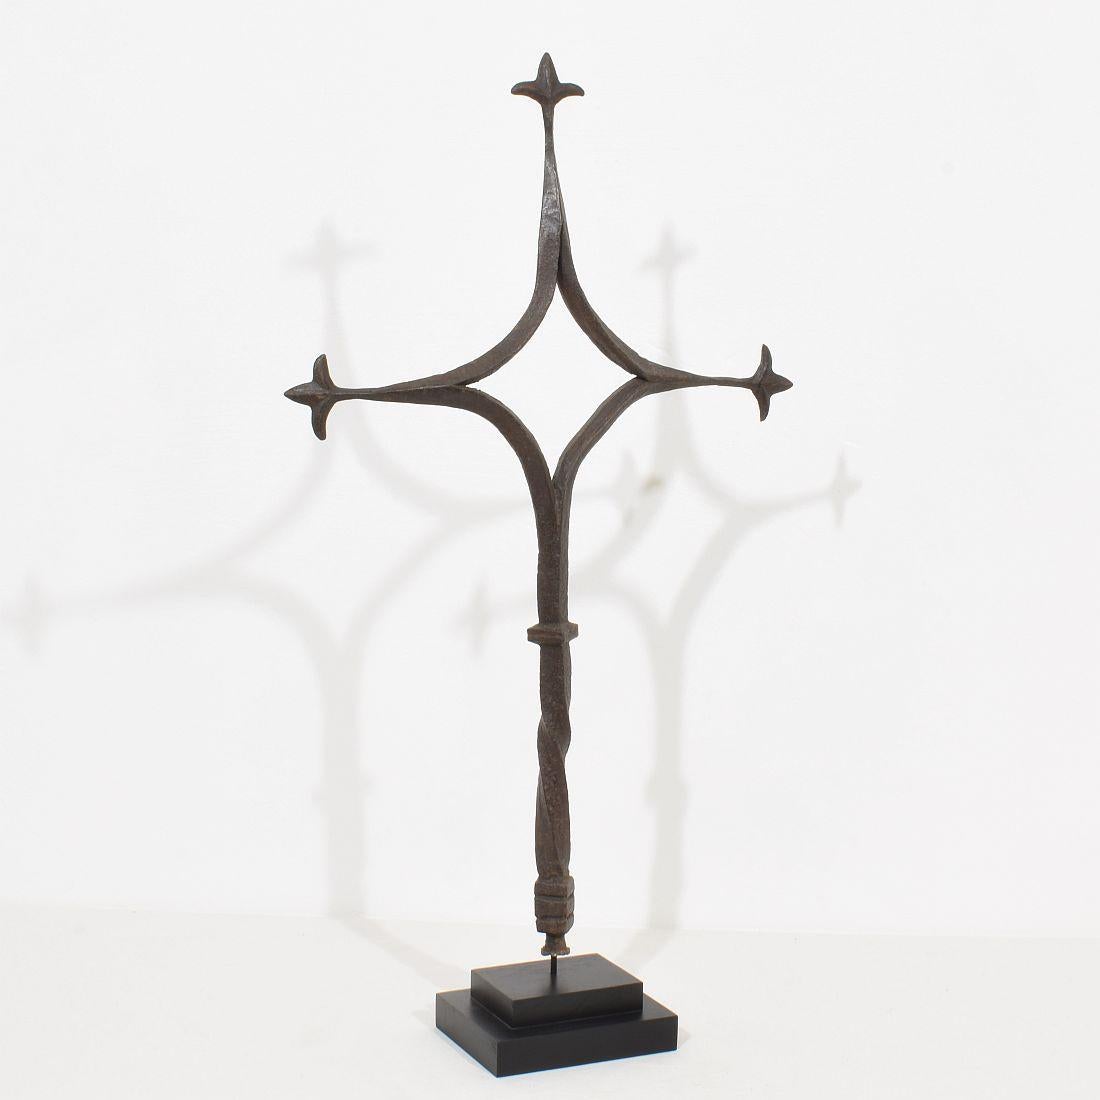 Unique hand forged iron cross that once stood in the centre of a Provençal village.
France, circa 1450-1550. Weathered.
Measurement is with the wooden base.